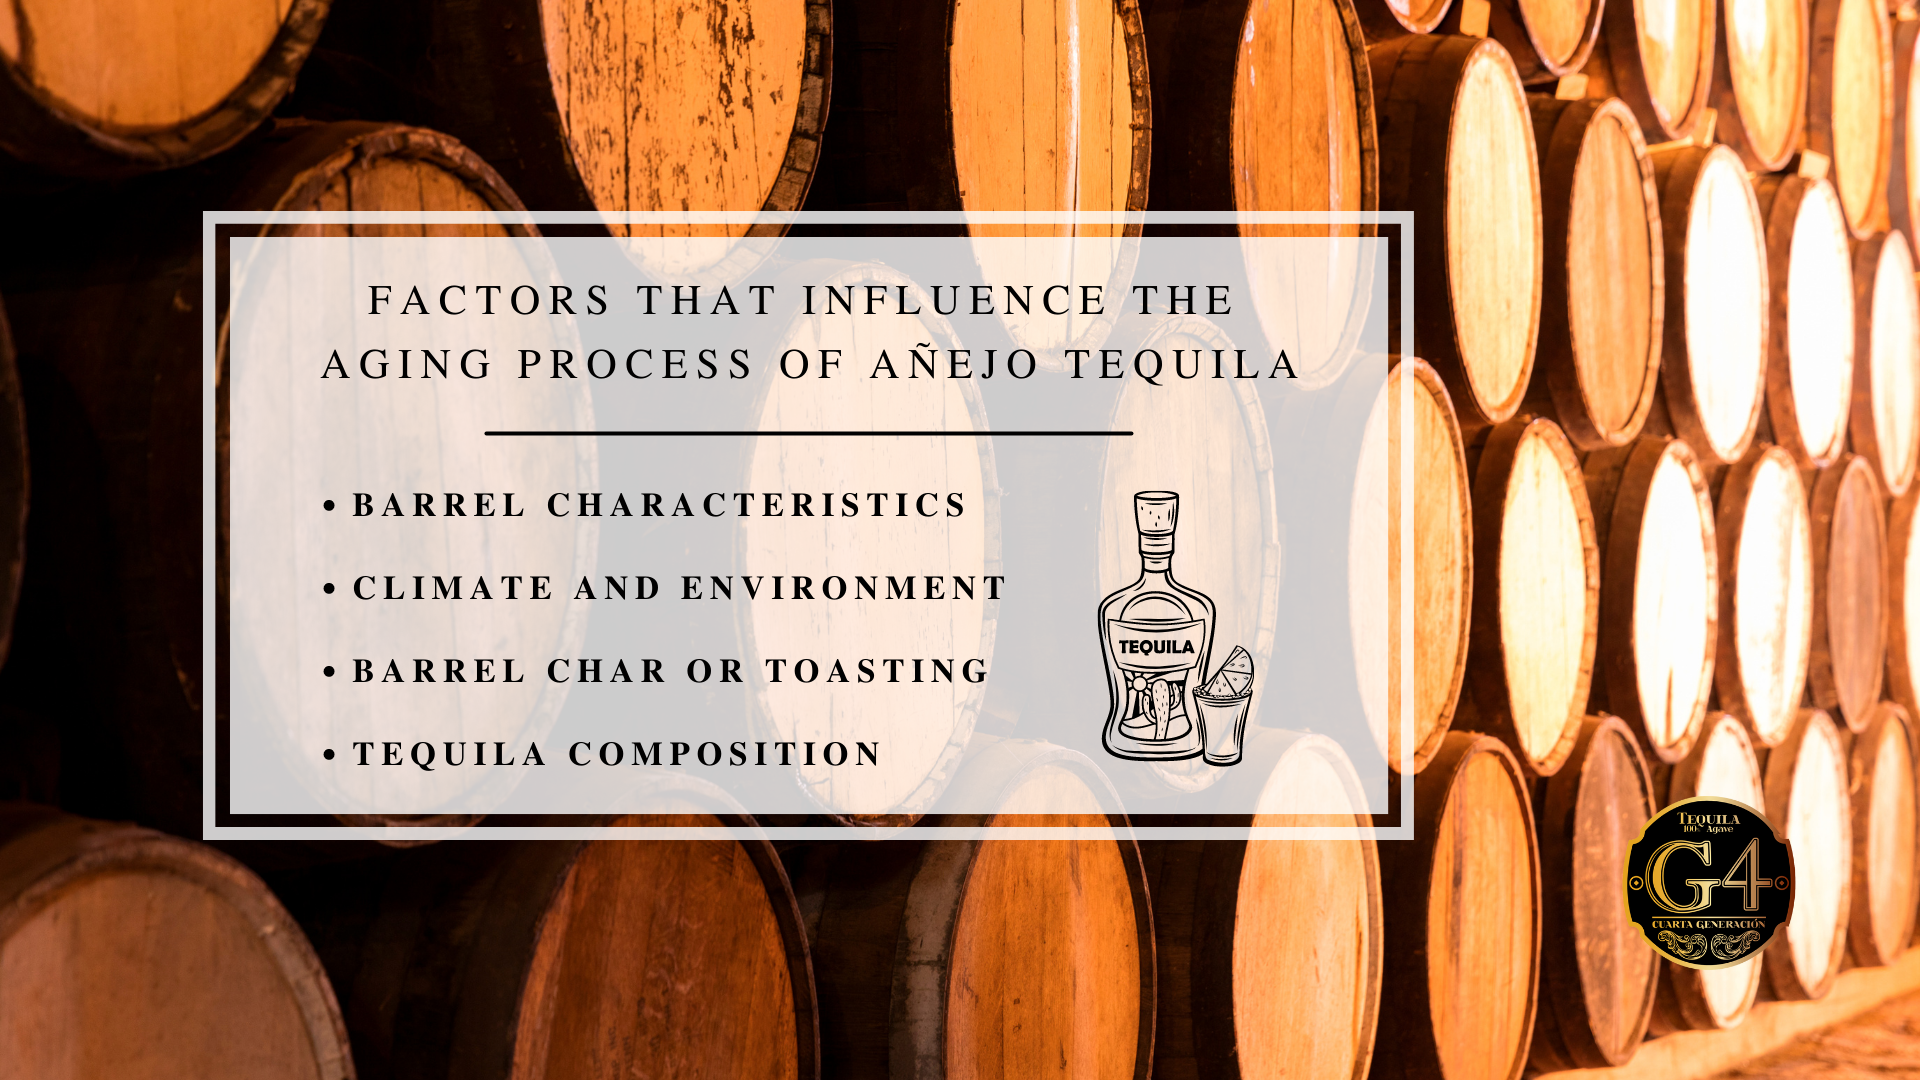 Infographic image of factors that influence the aging process of añejo tequila